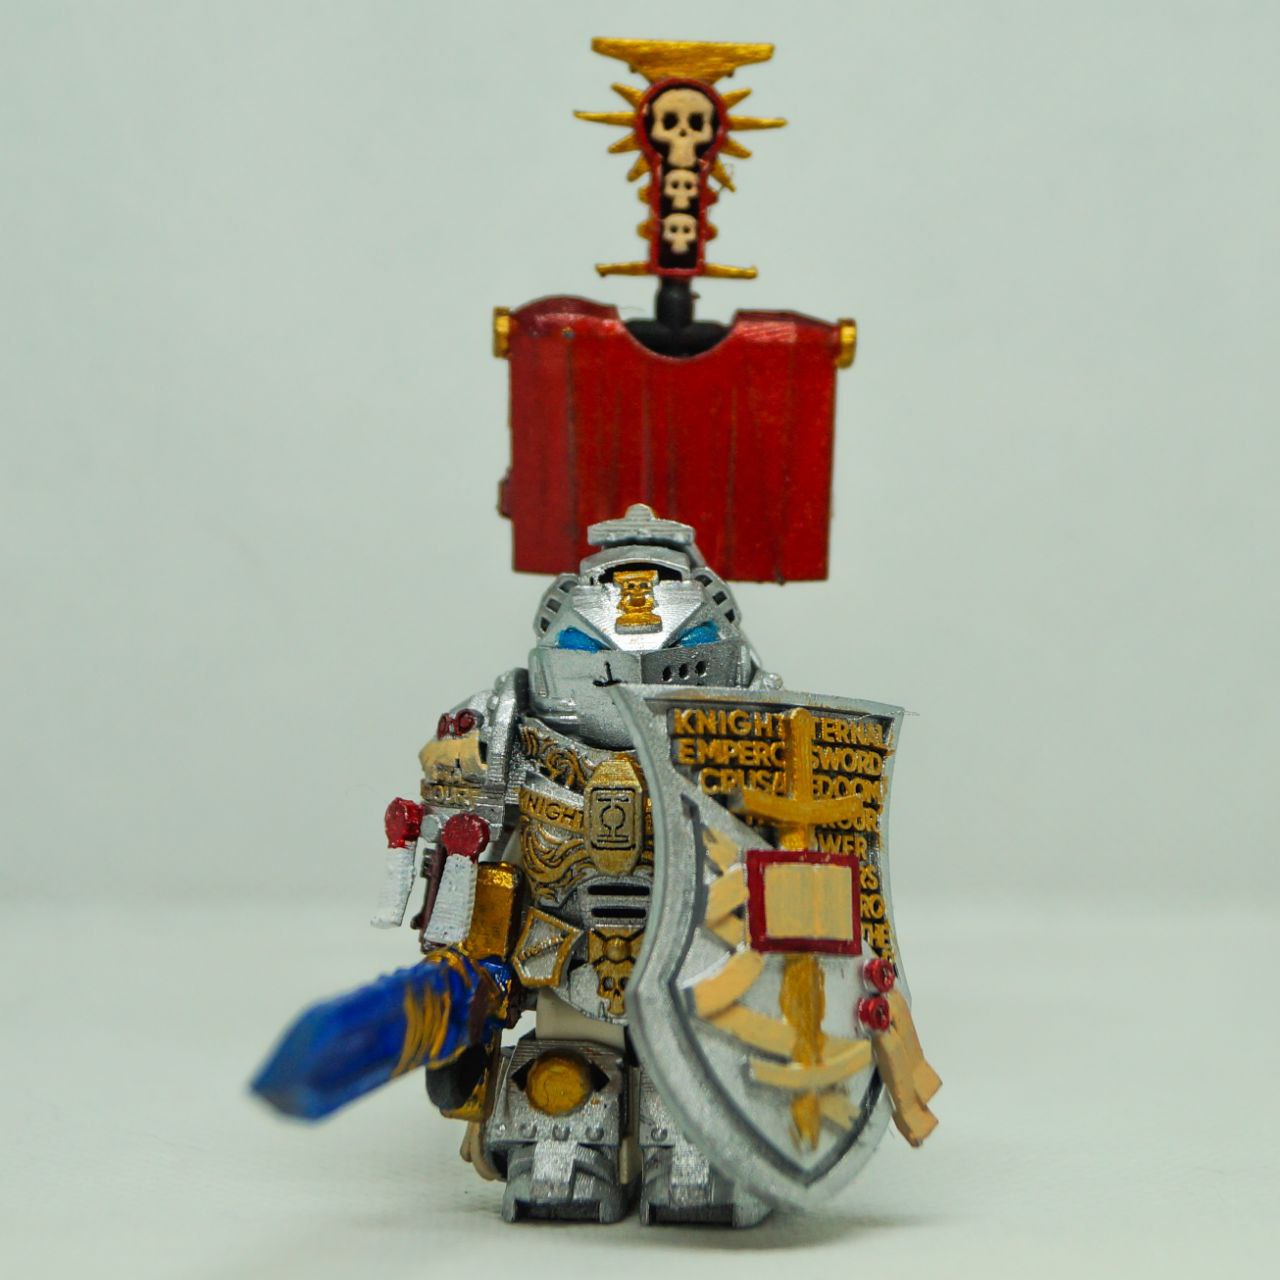 Reaven blocks custom 3D printed and painted space warrior knight!